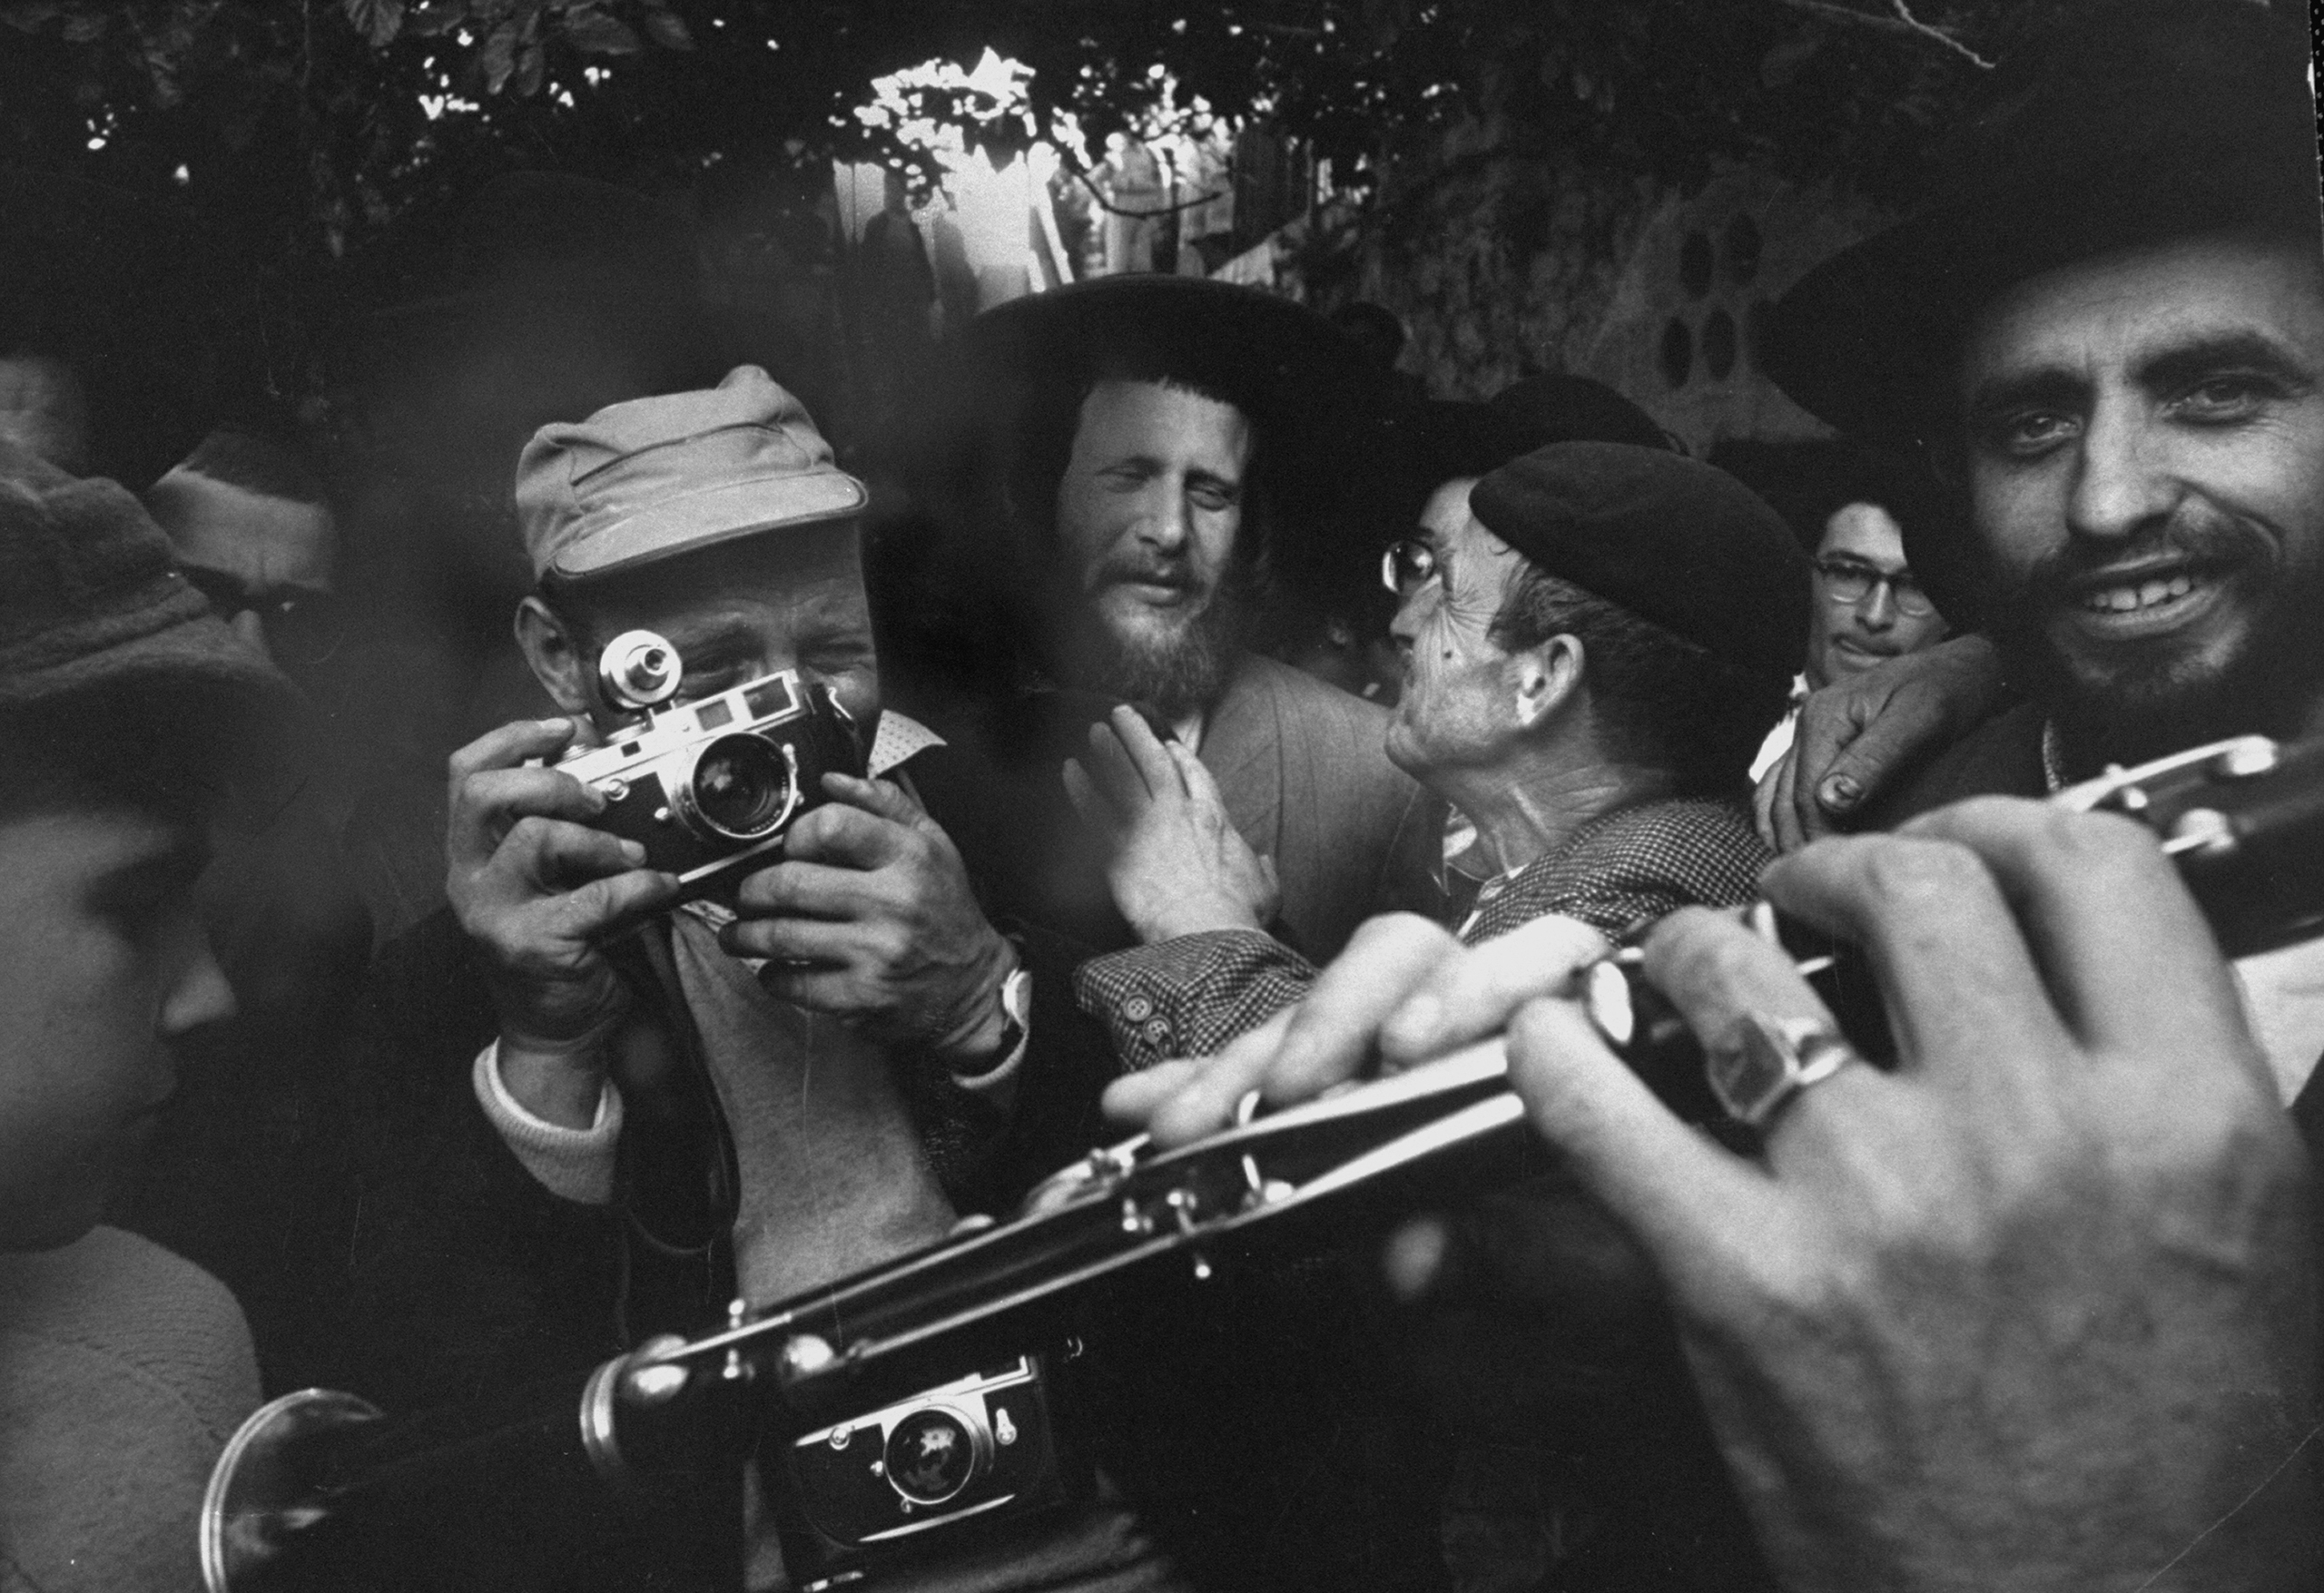 David Rubinger (center L), taking photographs at a religious festival in Israel. (Paul Schutzer—The LIFE Picture Collection/Getty images)